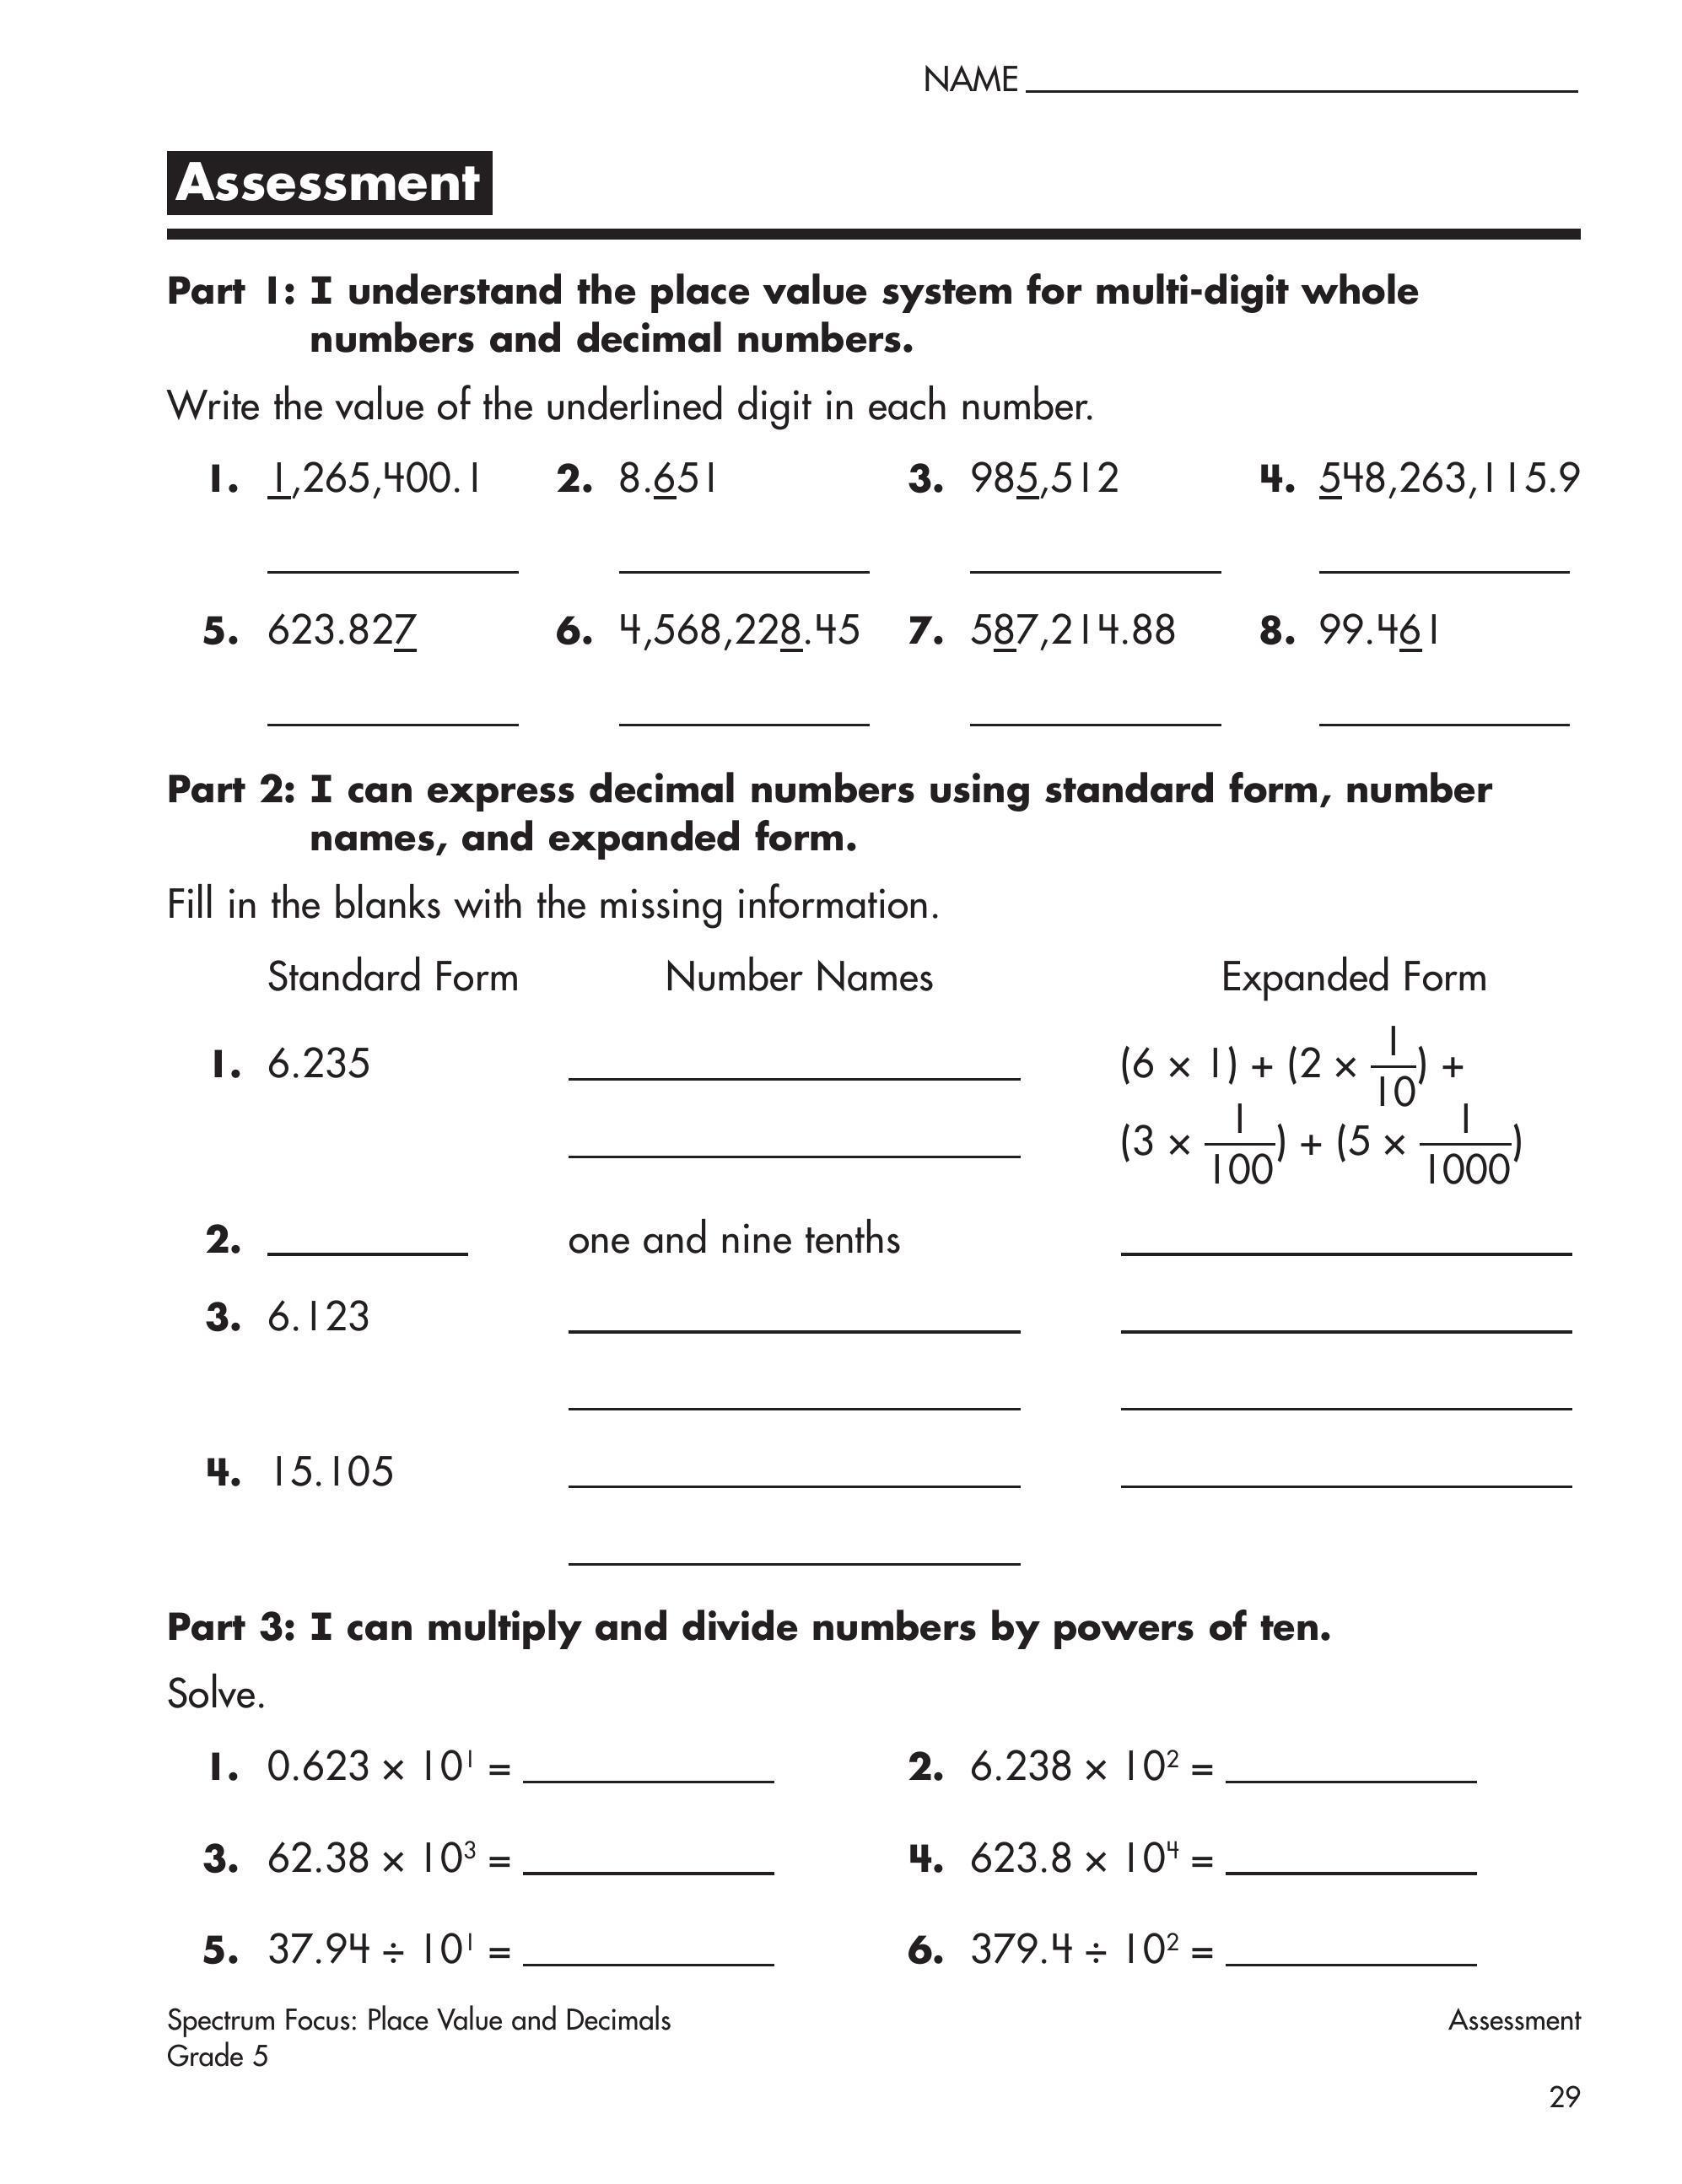 Place Value, Decimals, And Rounding 5 (29)